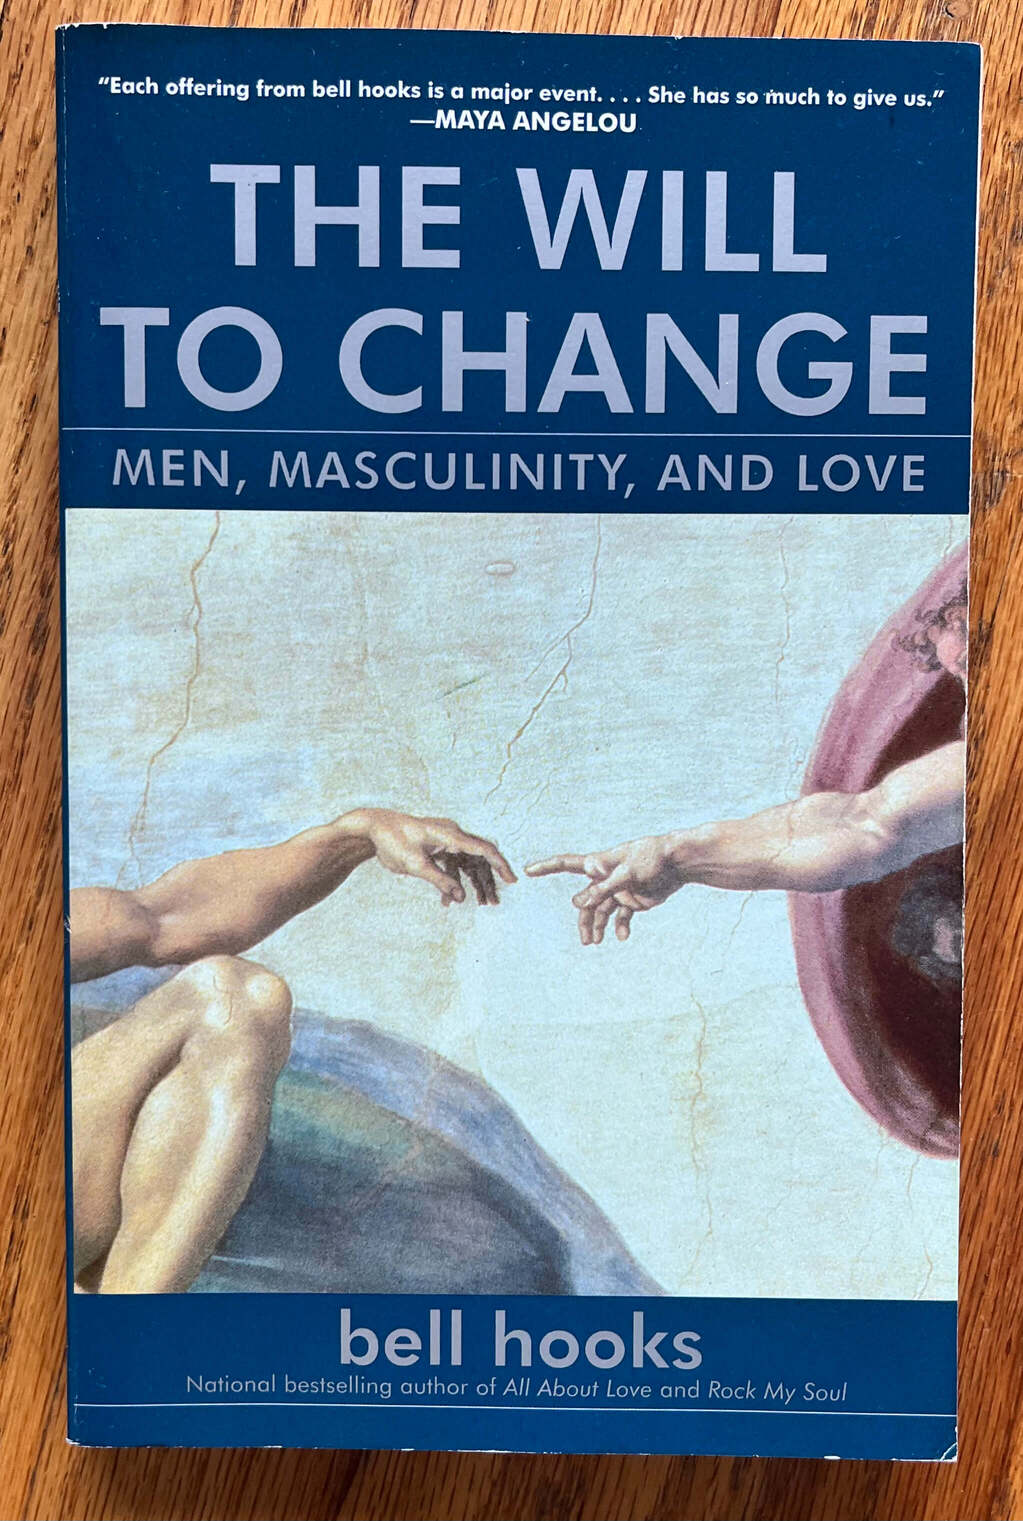 “The Will To Change: Men, Masculinity, and Love” by bell hooks.